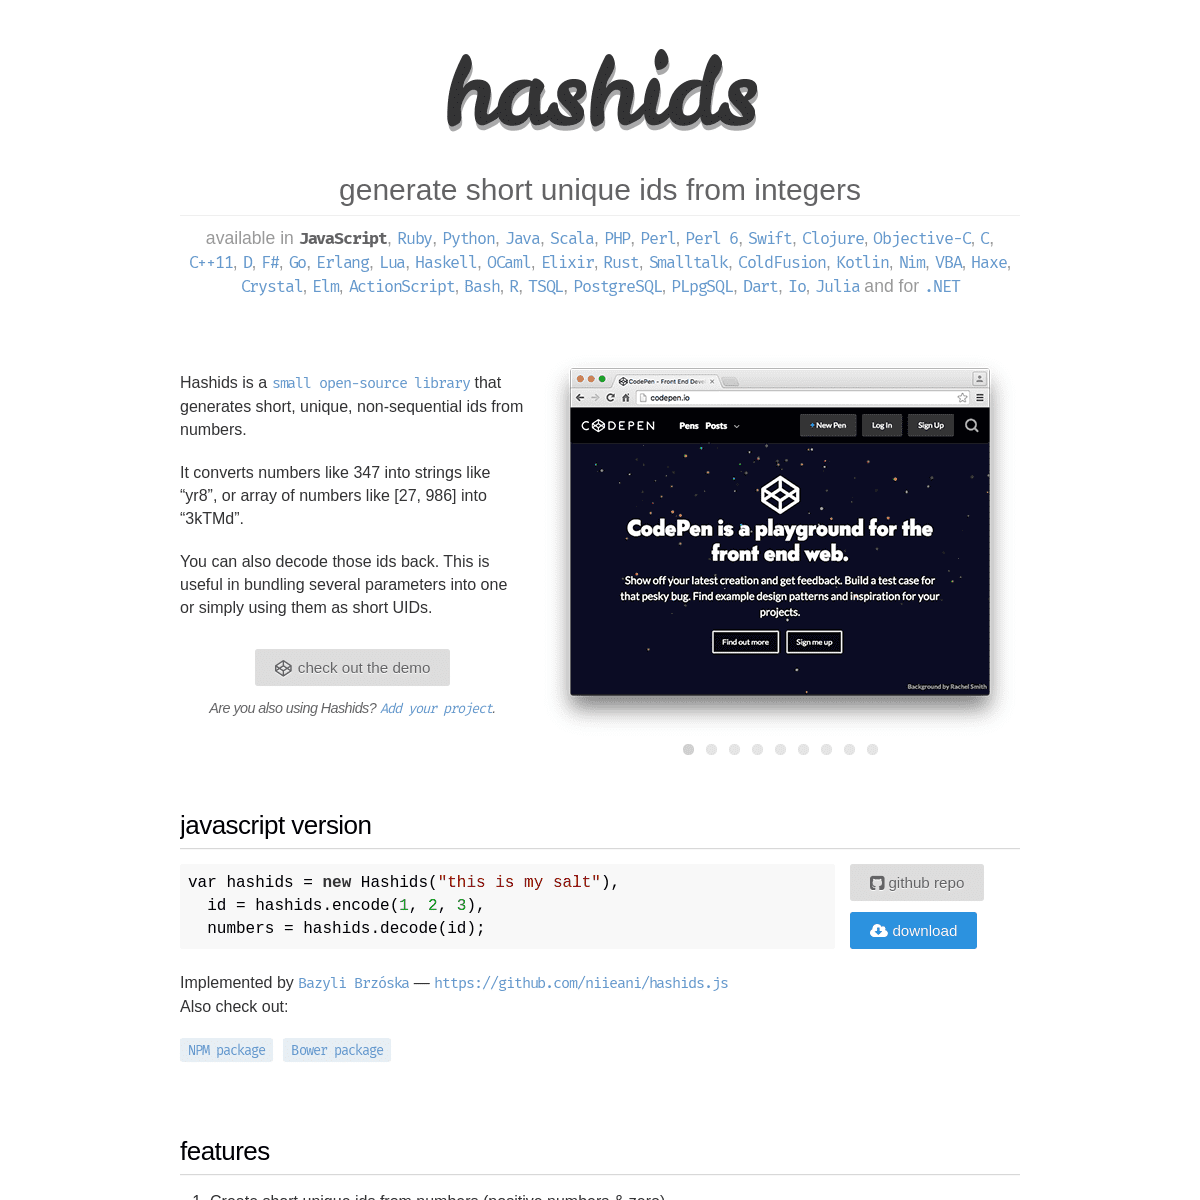 A complete backup of https://hashids.org